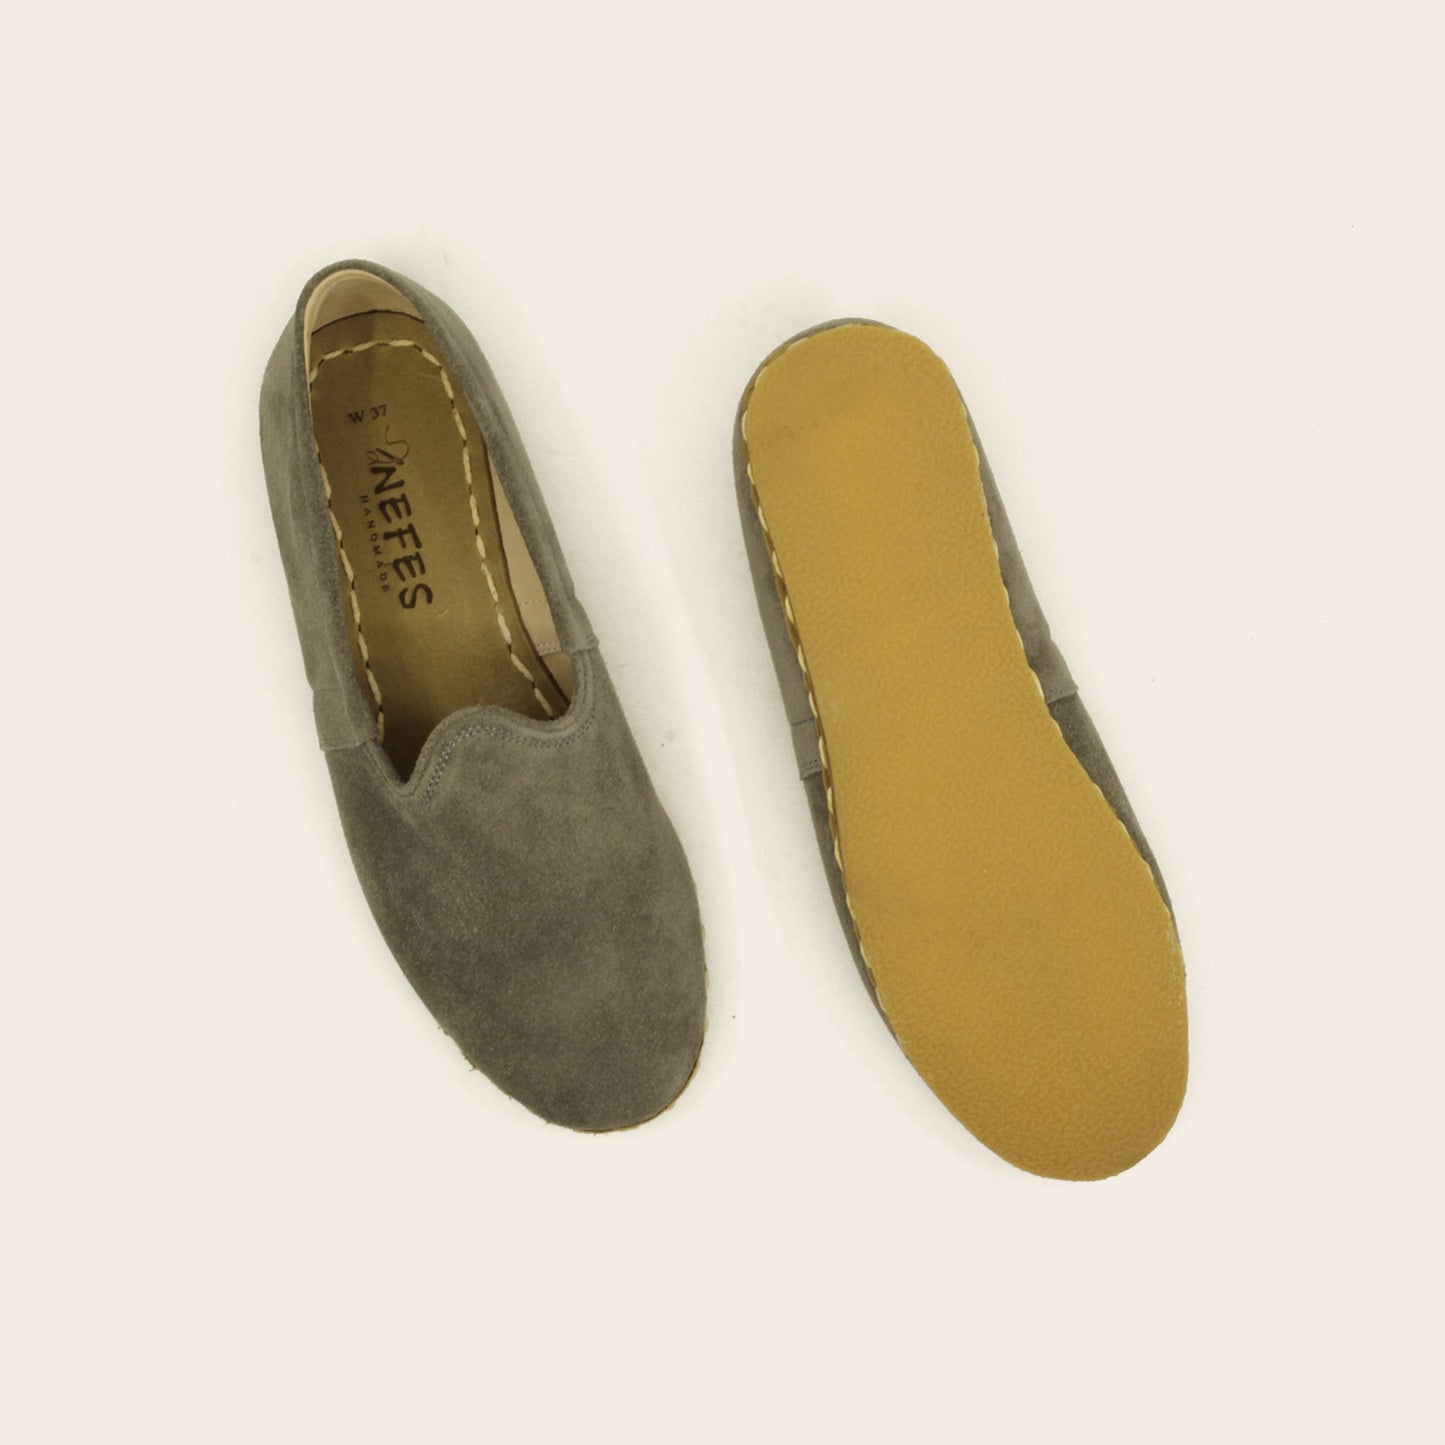 Gray Suede Slip Ons For Women - Nefes Shoes